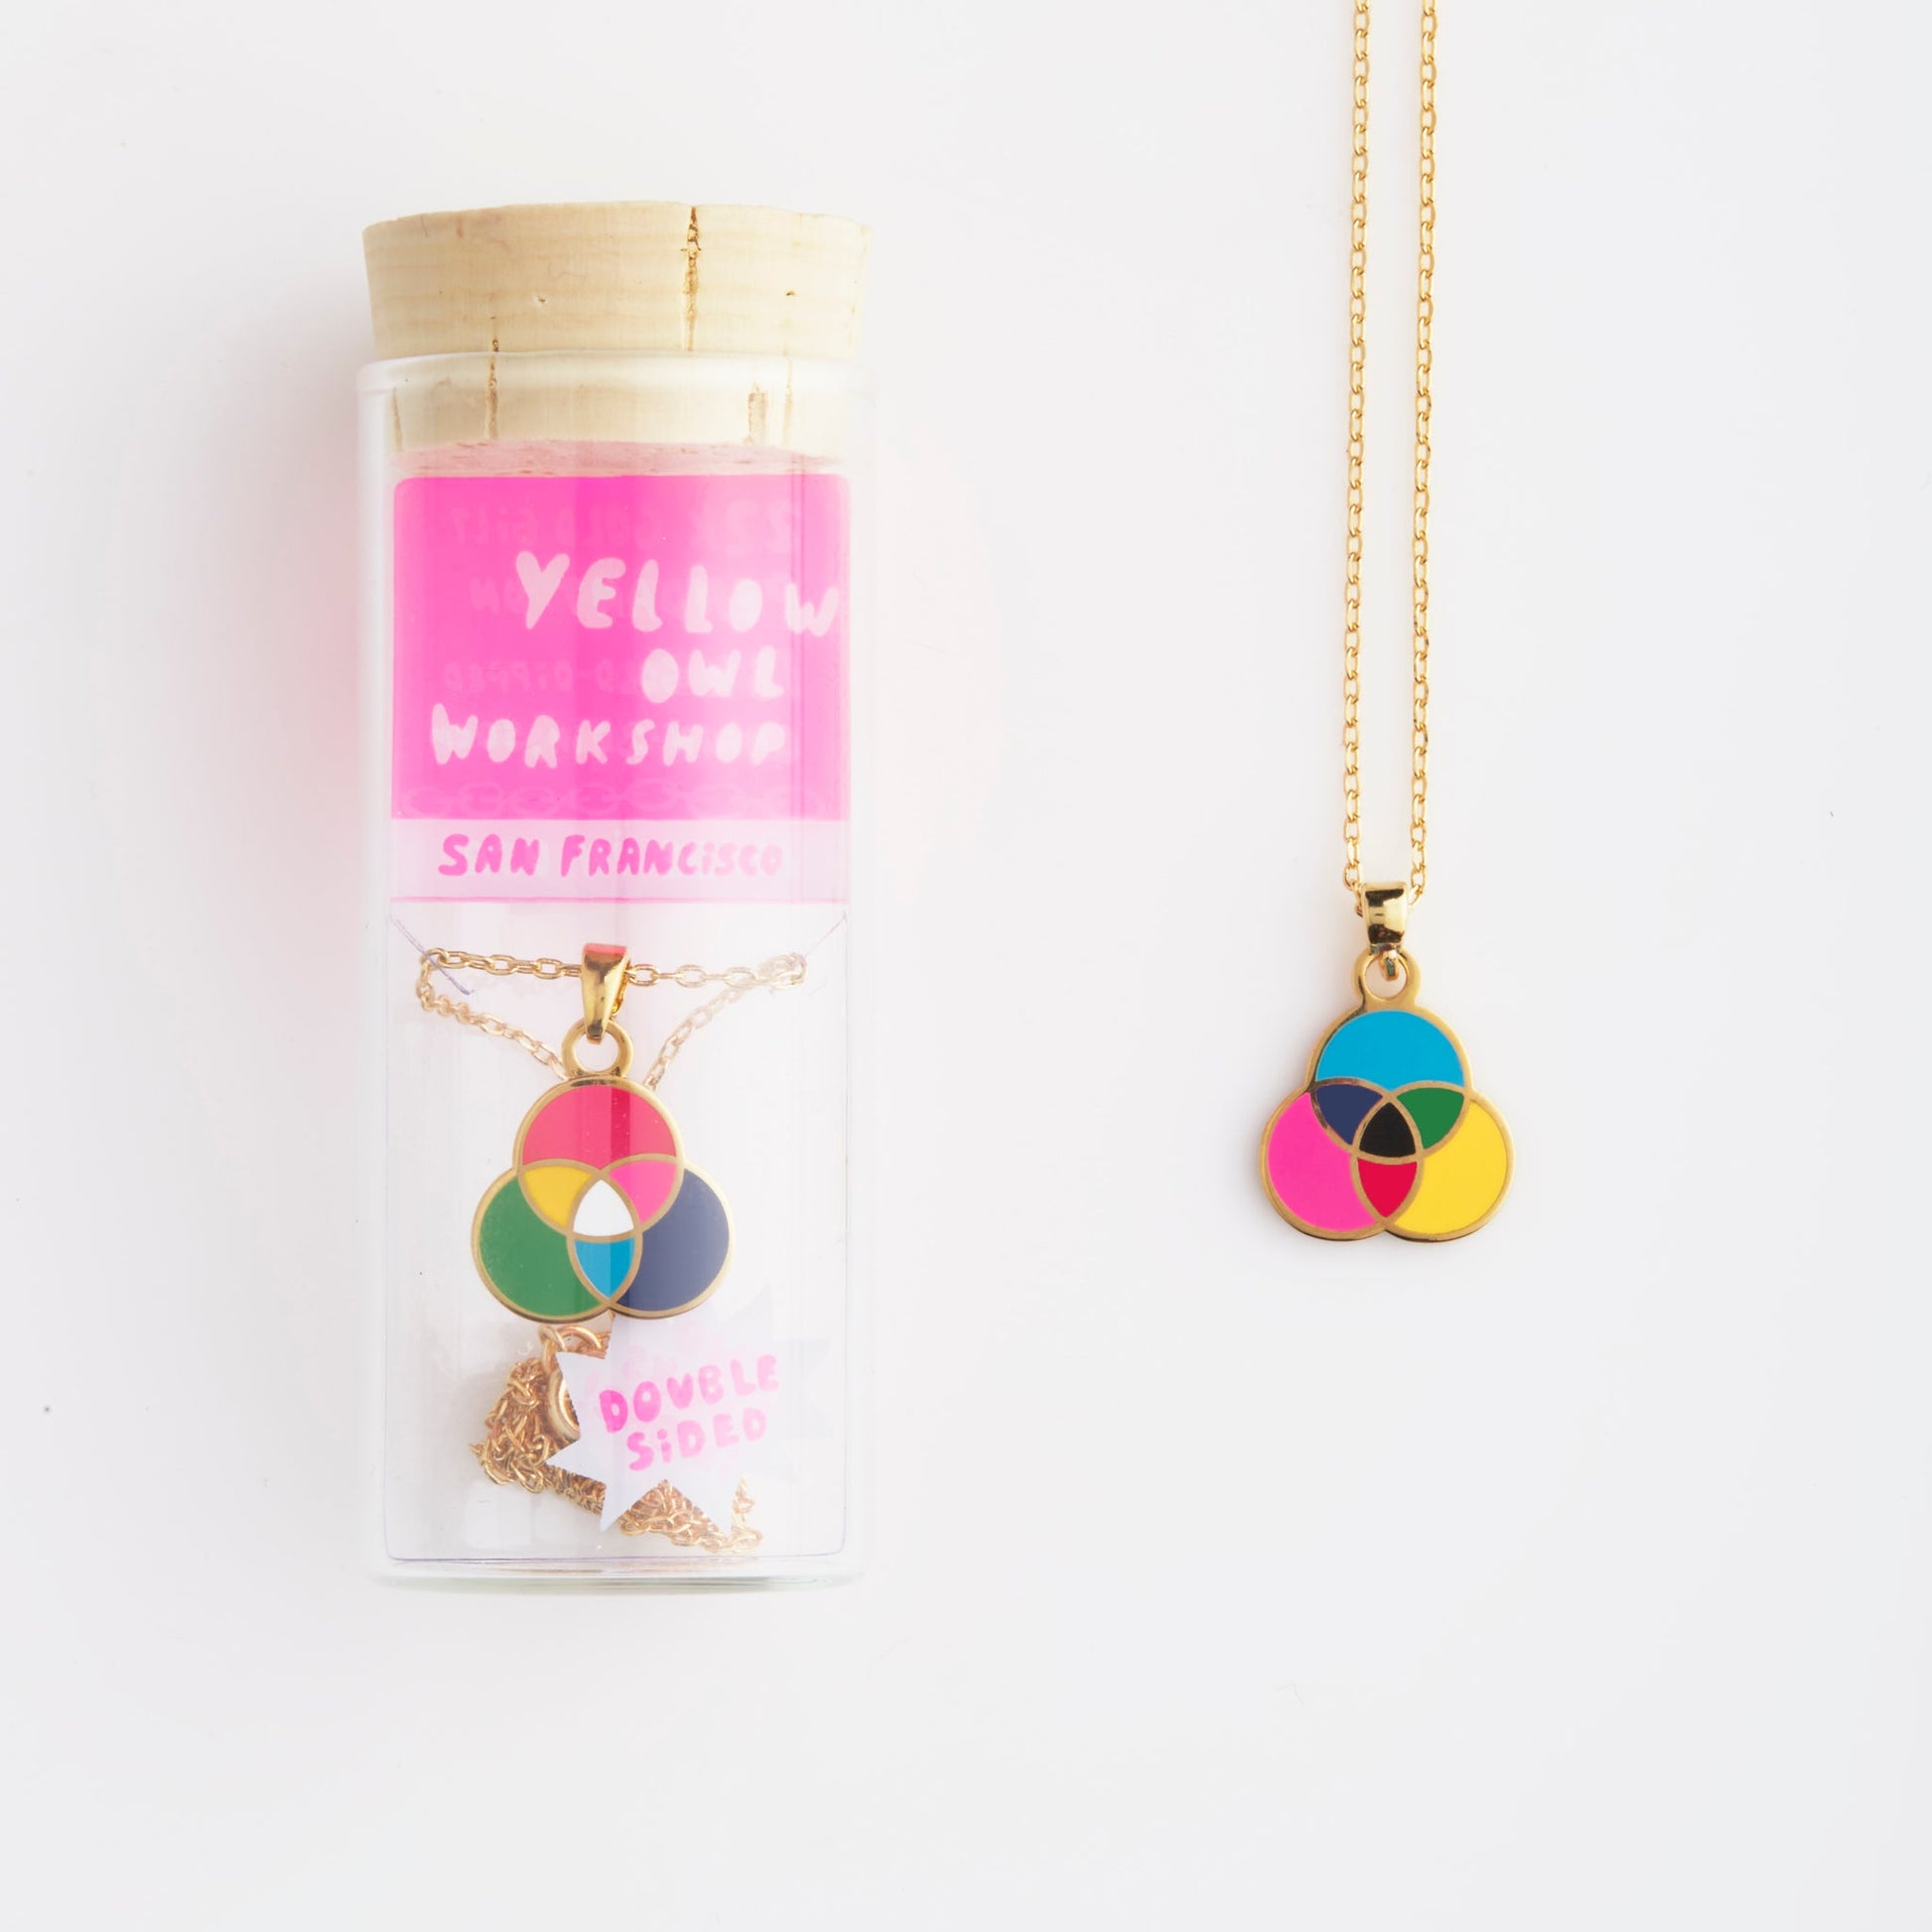 necklace shown in glass vile packaging on white background.